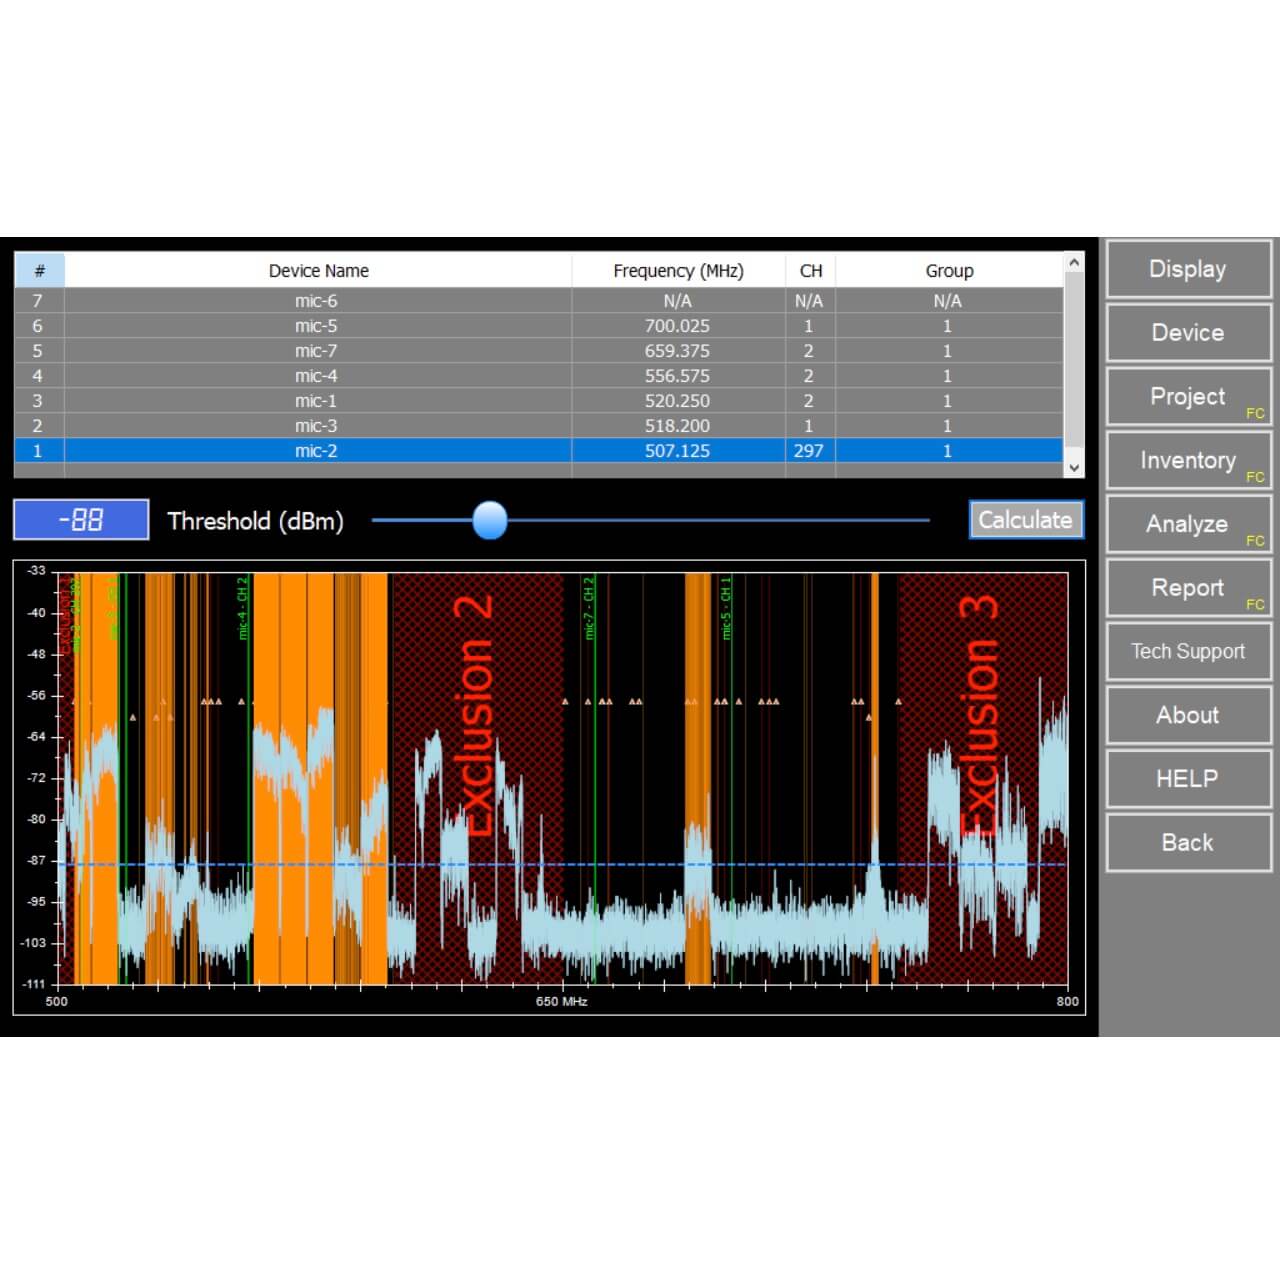 RF Venue RF Explorer Pro - Frequency Configuration and Analyzer coordinated